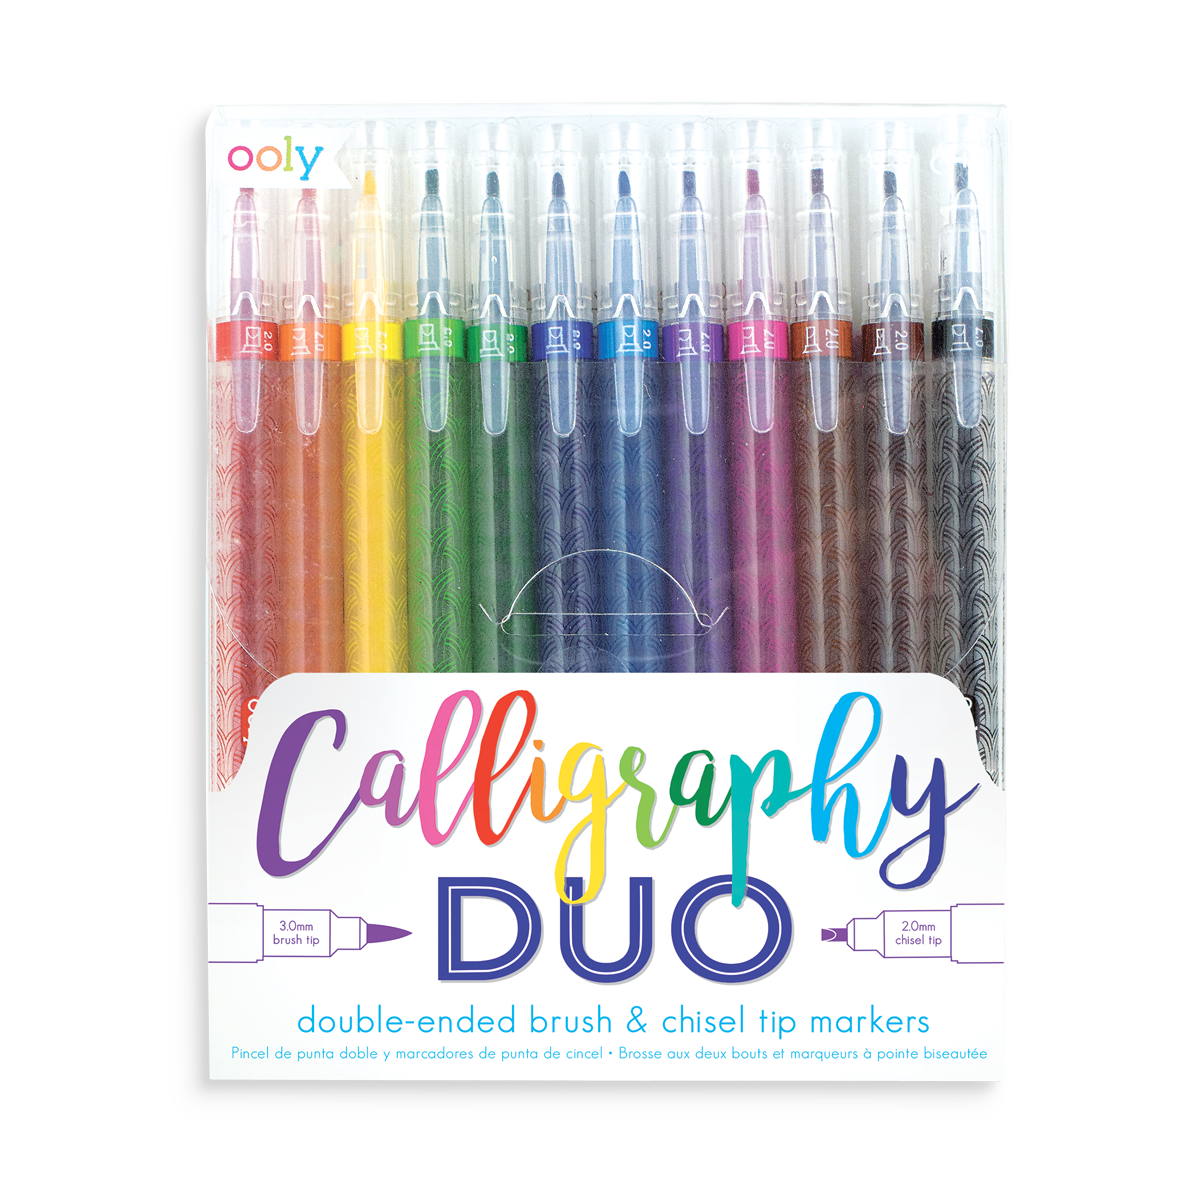 OOLY Calligraphy Duo Chisel and Brush Tip Markers Brush Sets